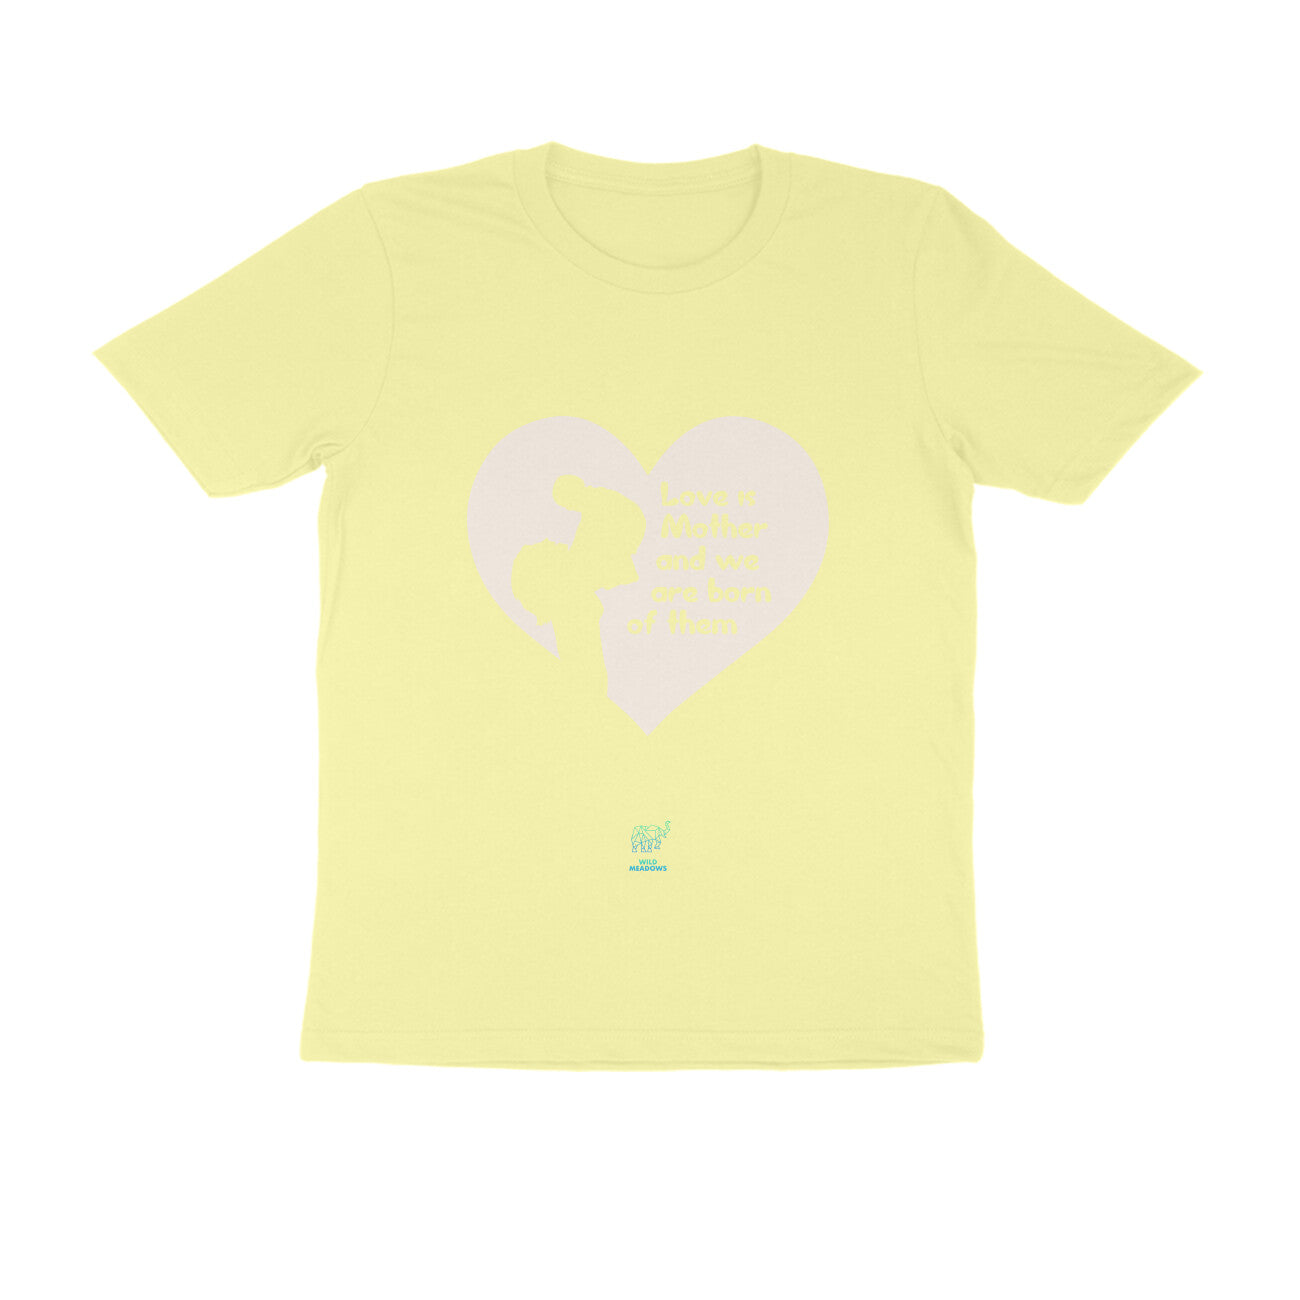 MOM - Love is mother - Round Neck Unisex Tees..